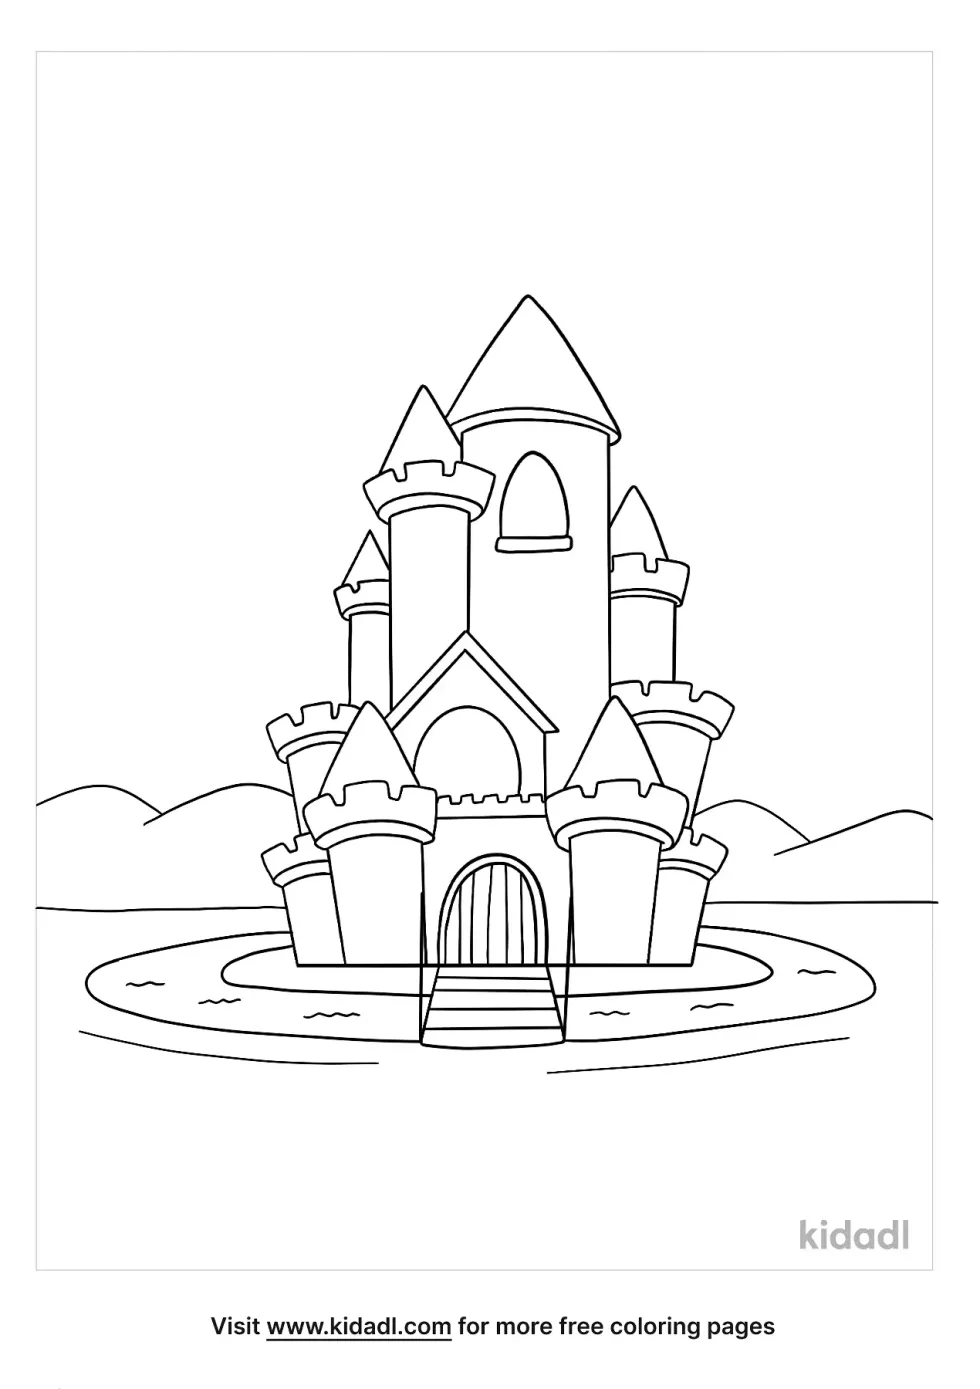 Moat Coloring Page